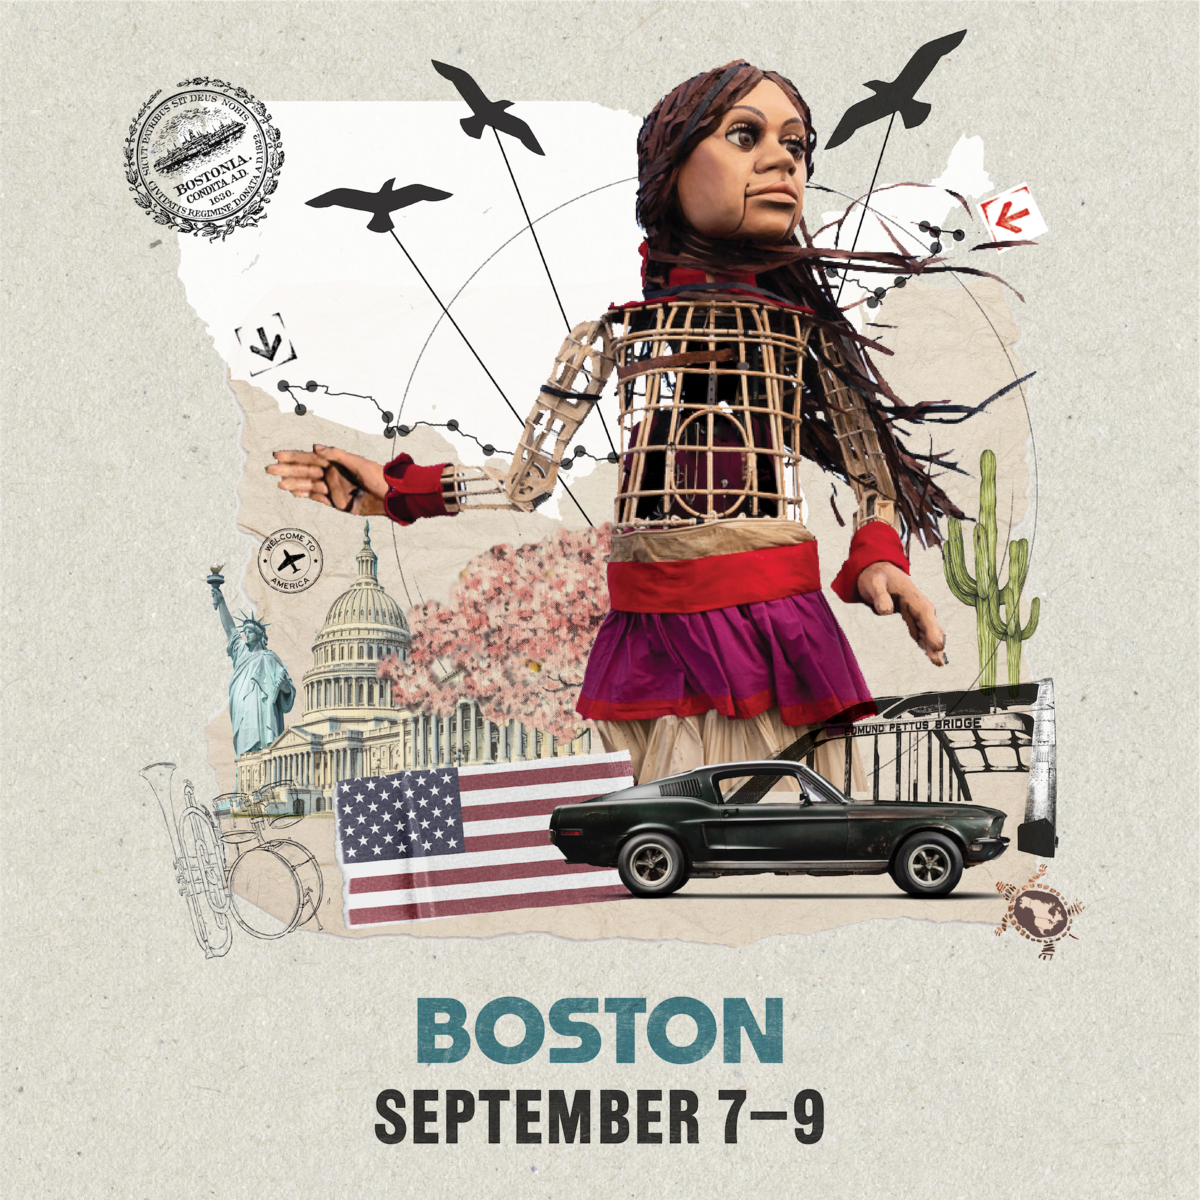 Graphic with image of Little Amal and text: "Boston September 7-9"